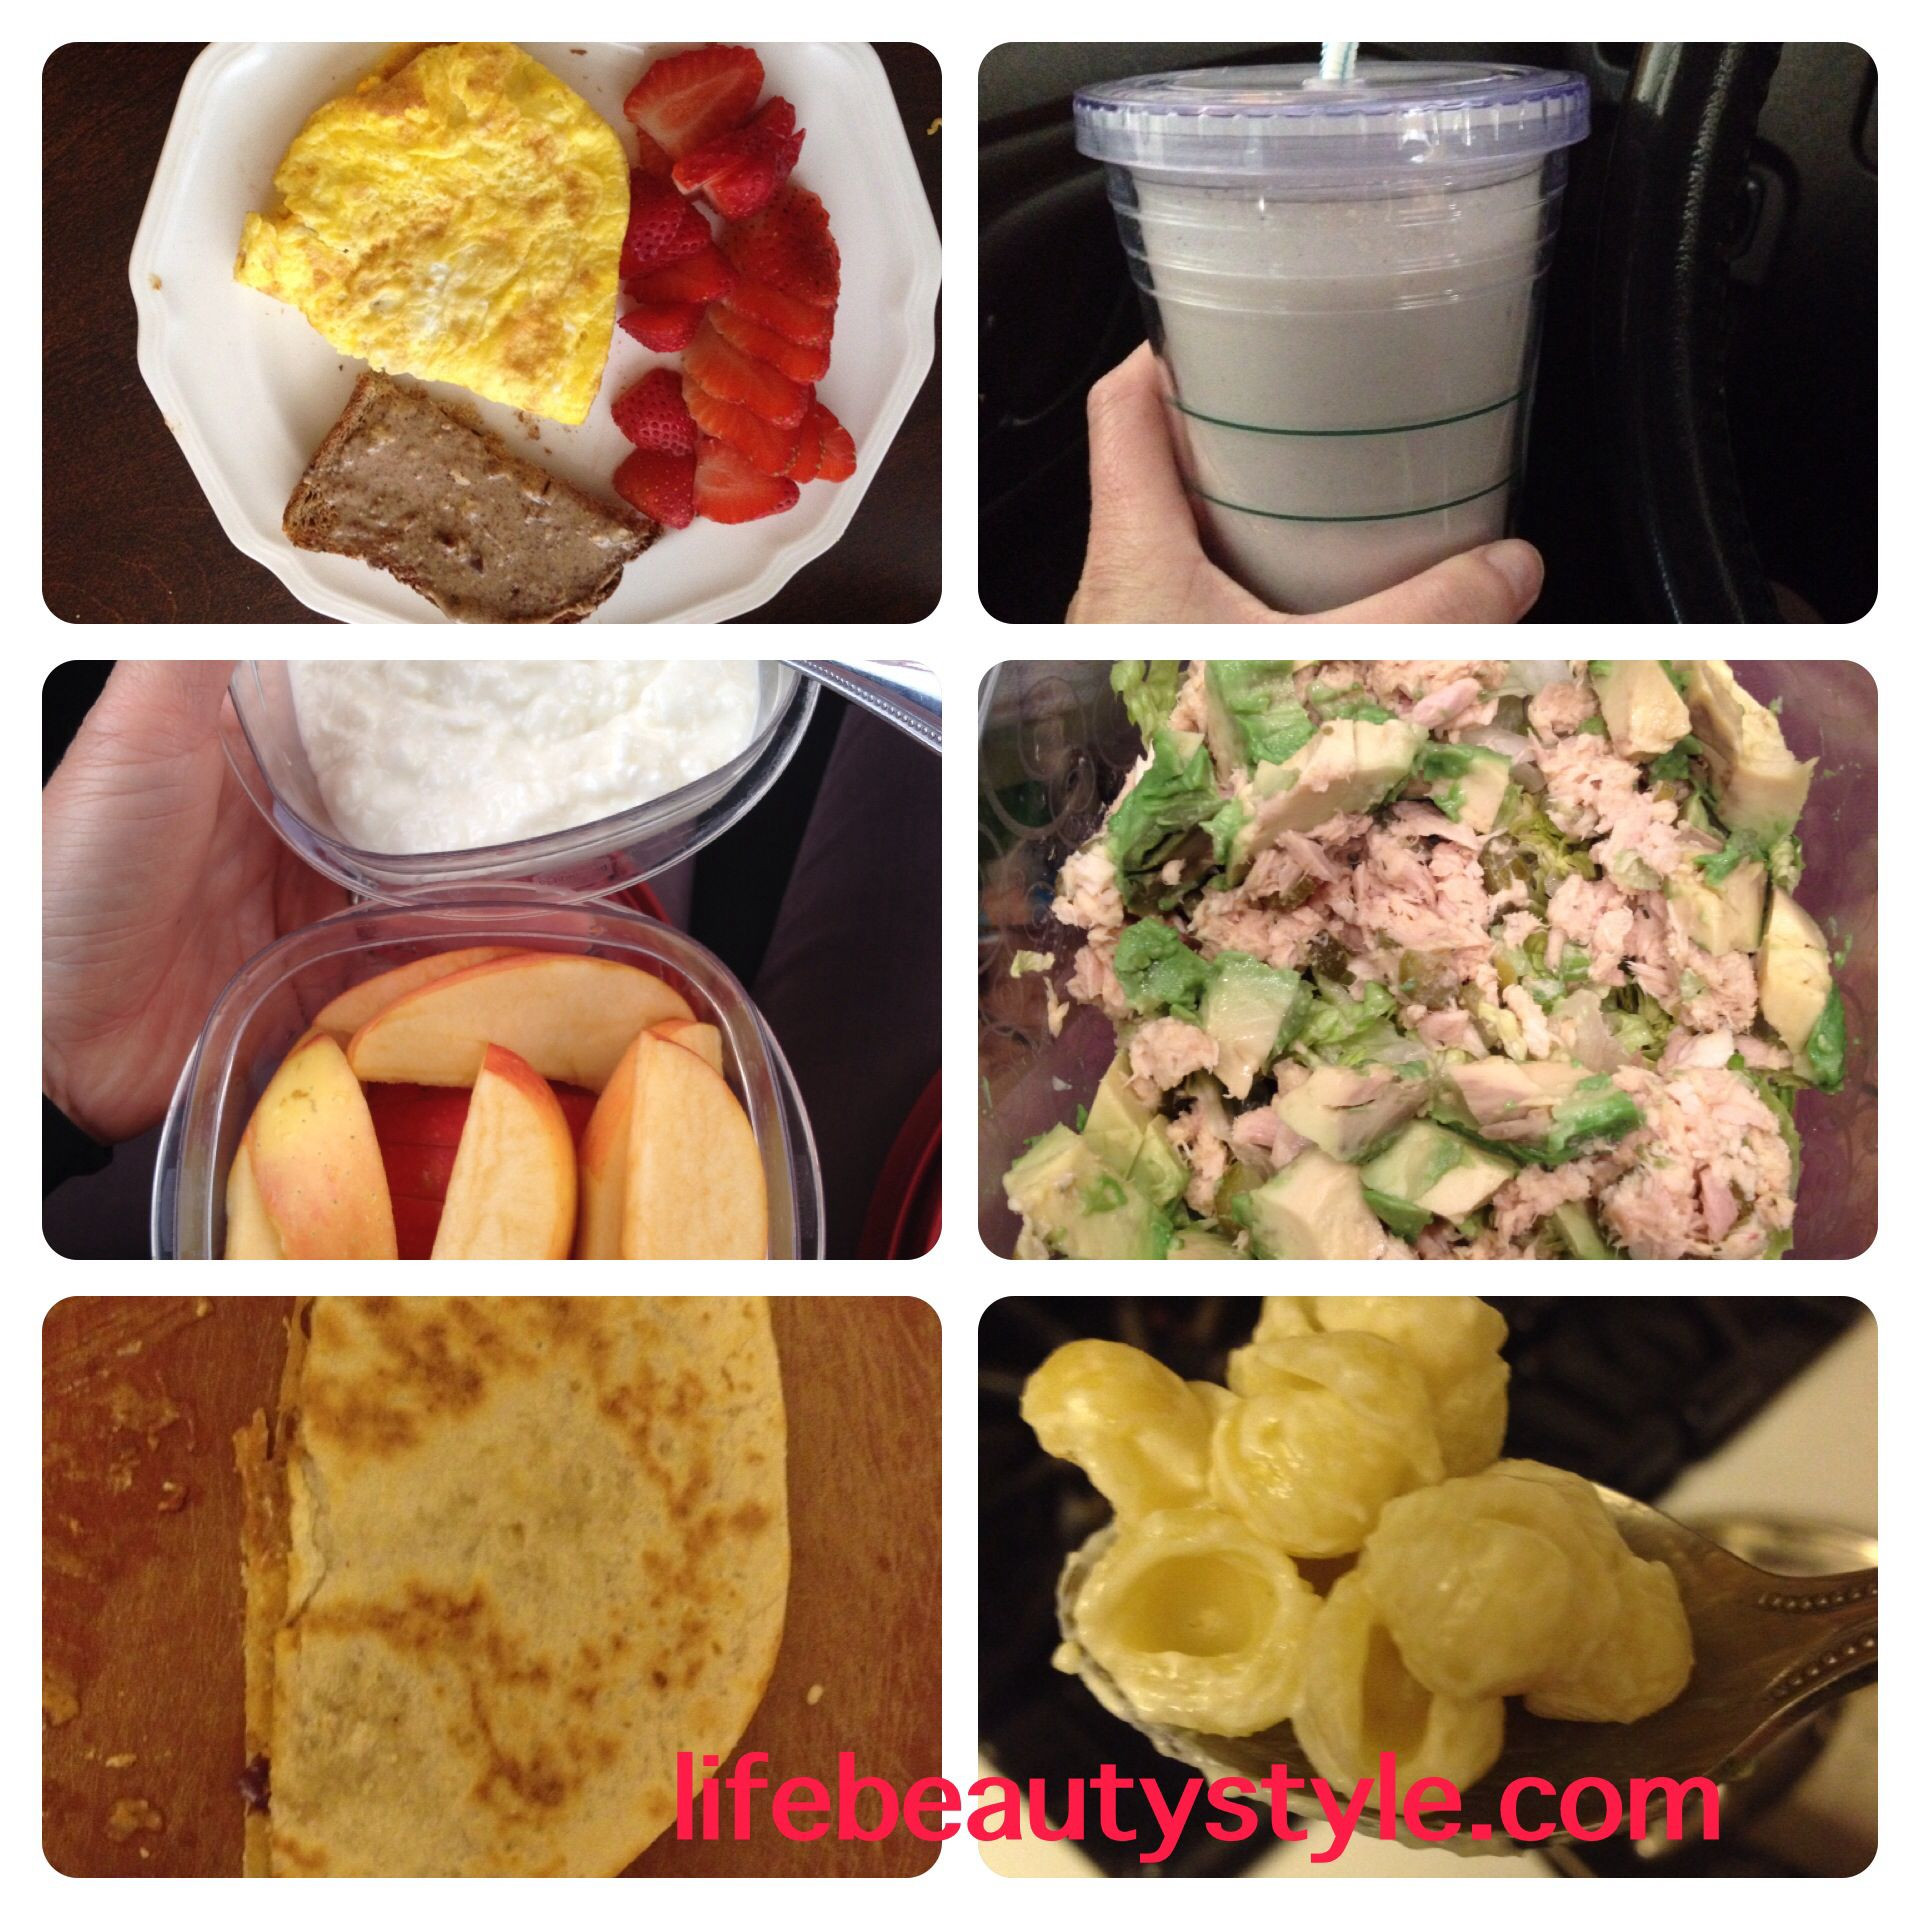 Healthy Pregnancy Lunches
 The 25 best Healthy pregnancy meals ideas on Pinterest